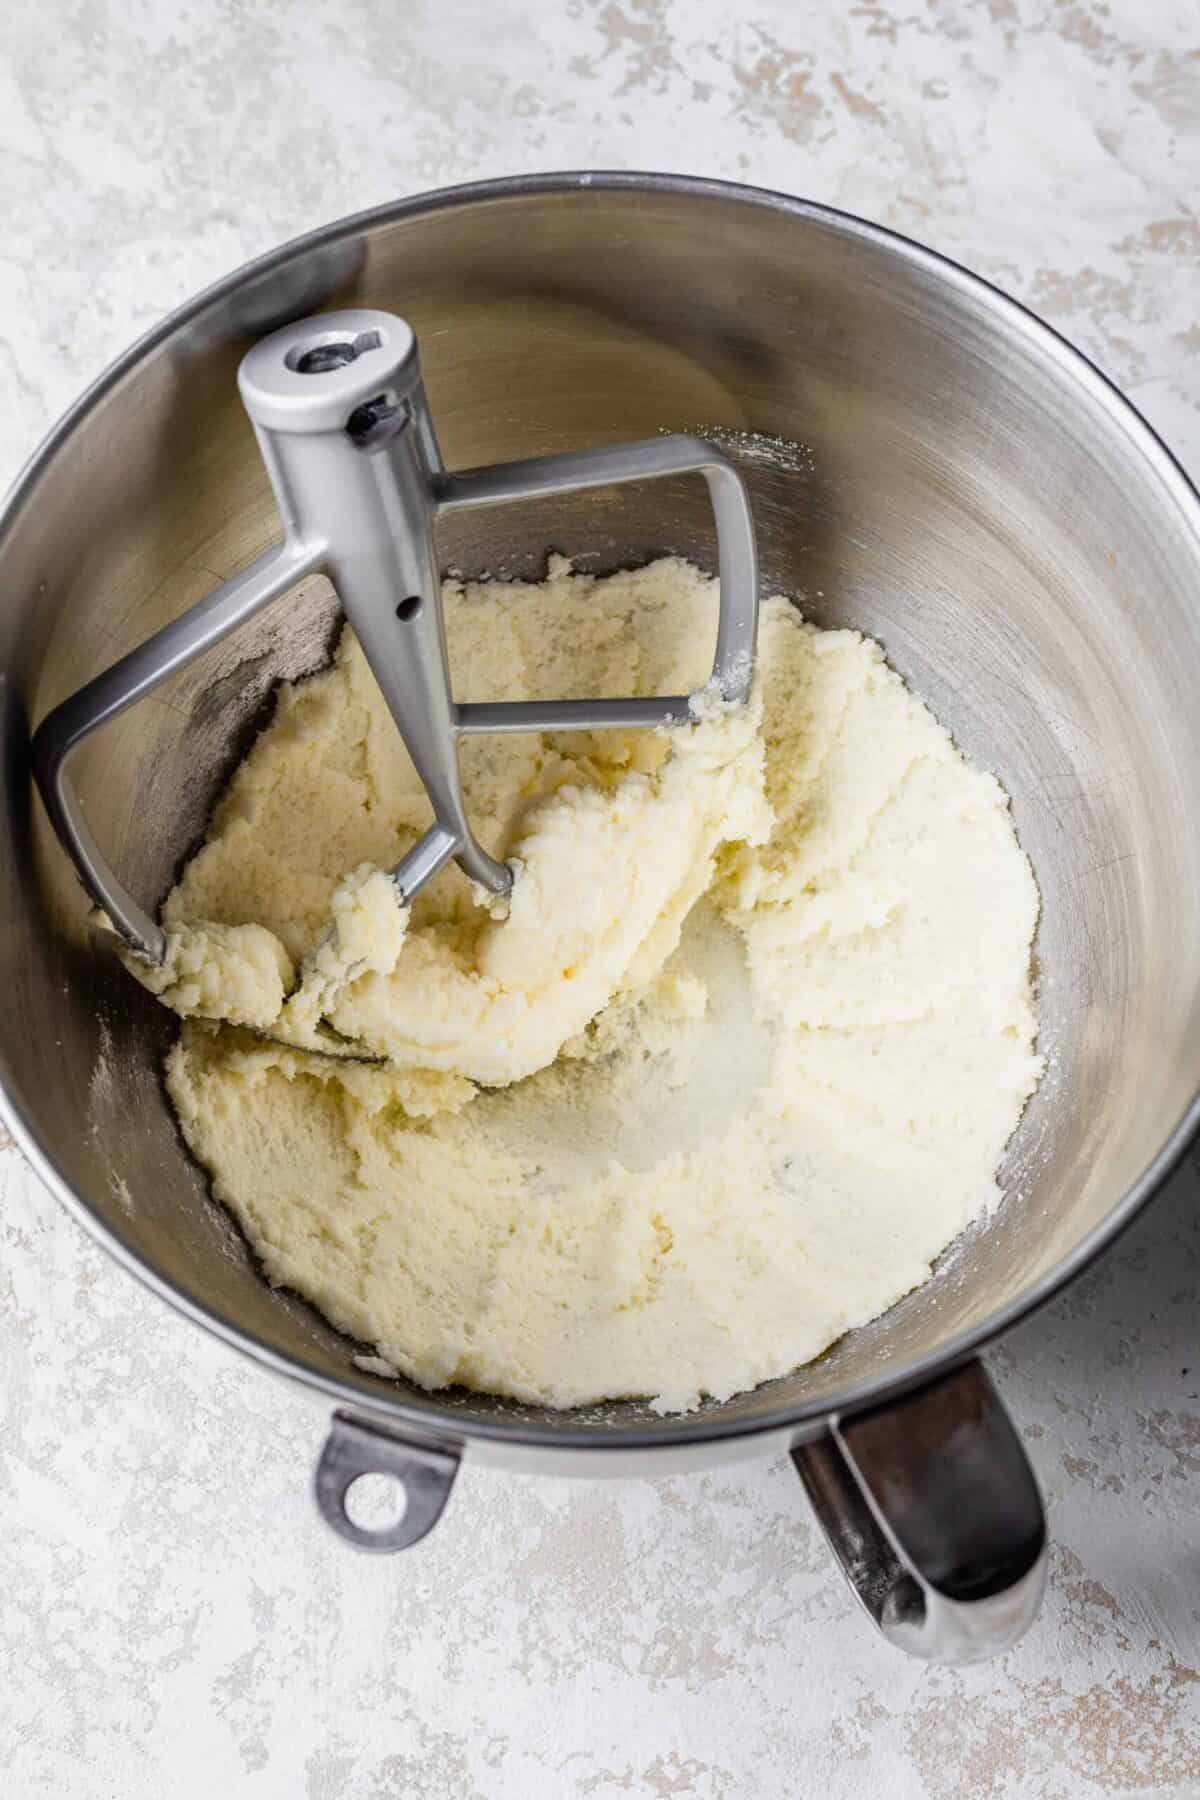 A stand mixer bowl filled with butter and cream that have been beaten, with a paddle attachment in the bowl